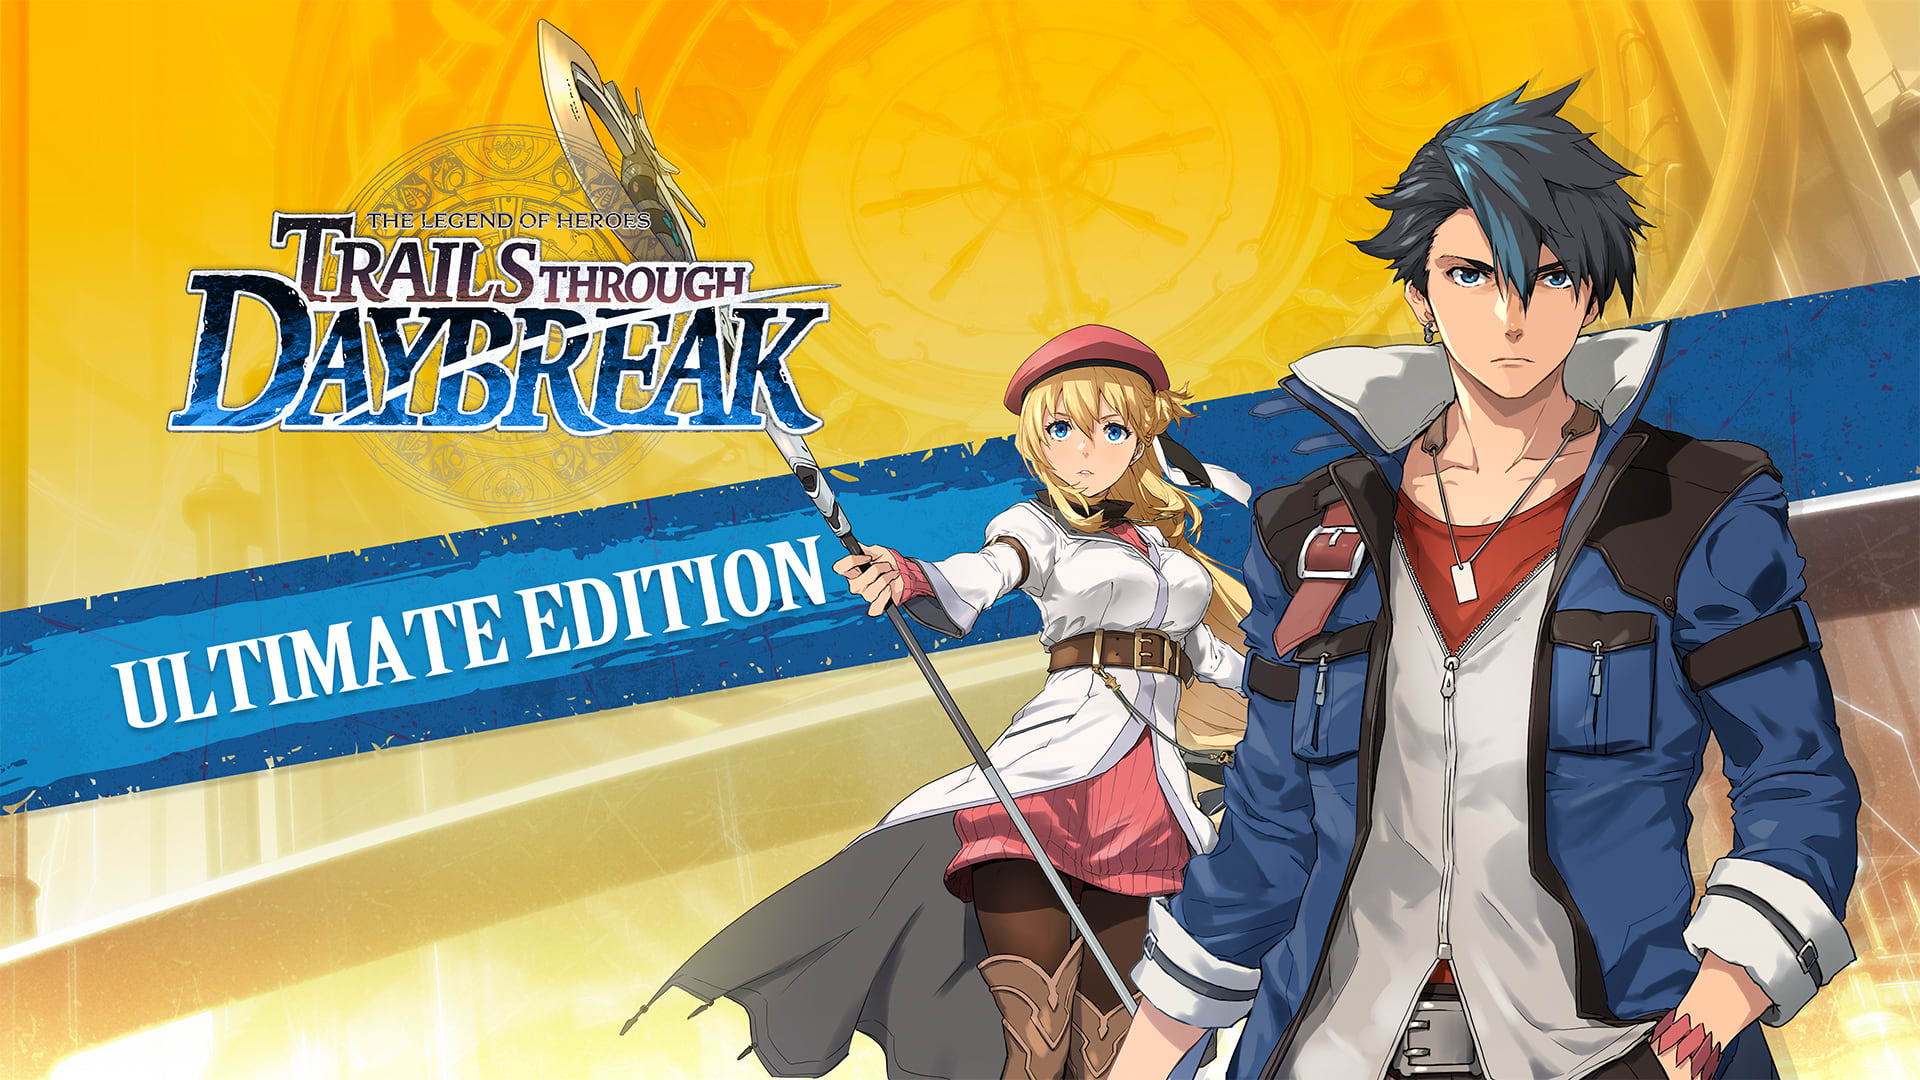 The Legend of Heroes: Trails through Daybreak - Ultimate Edition